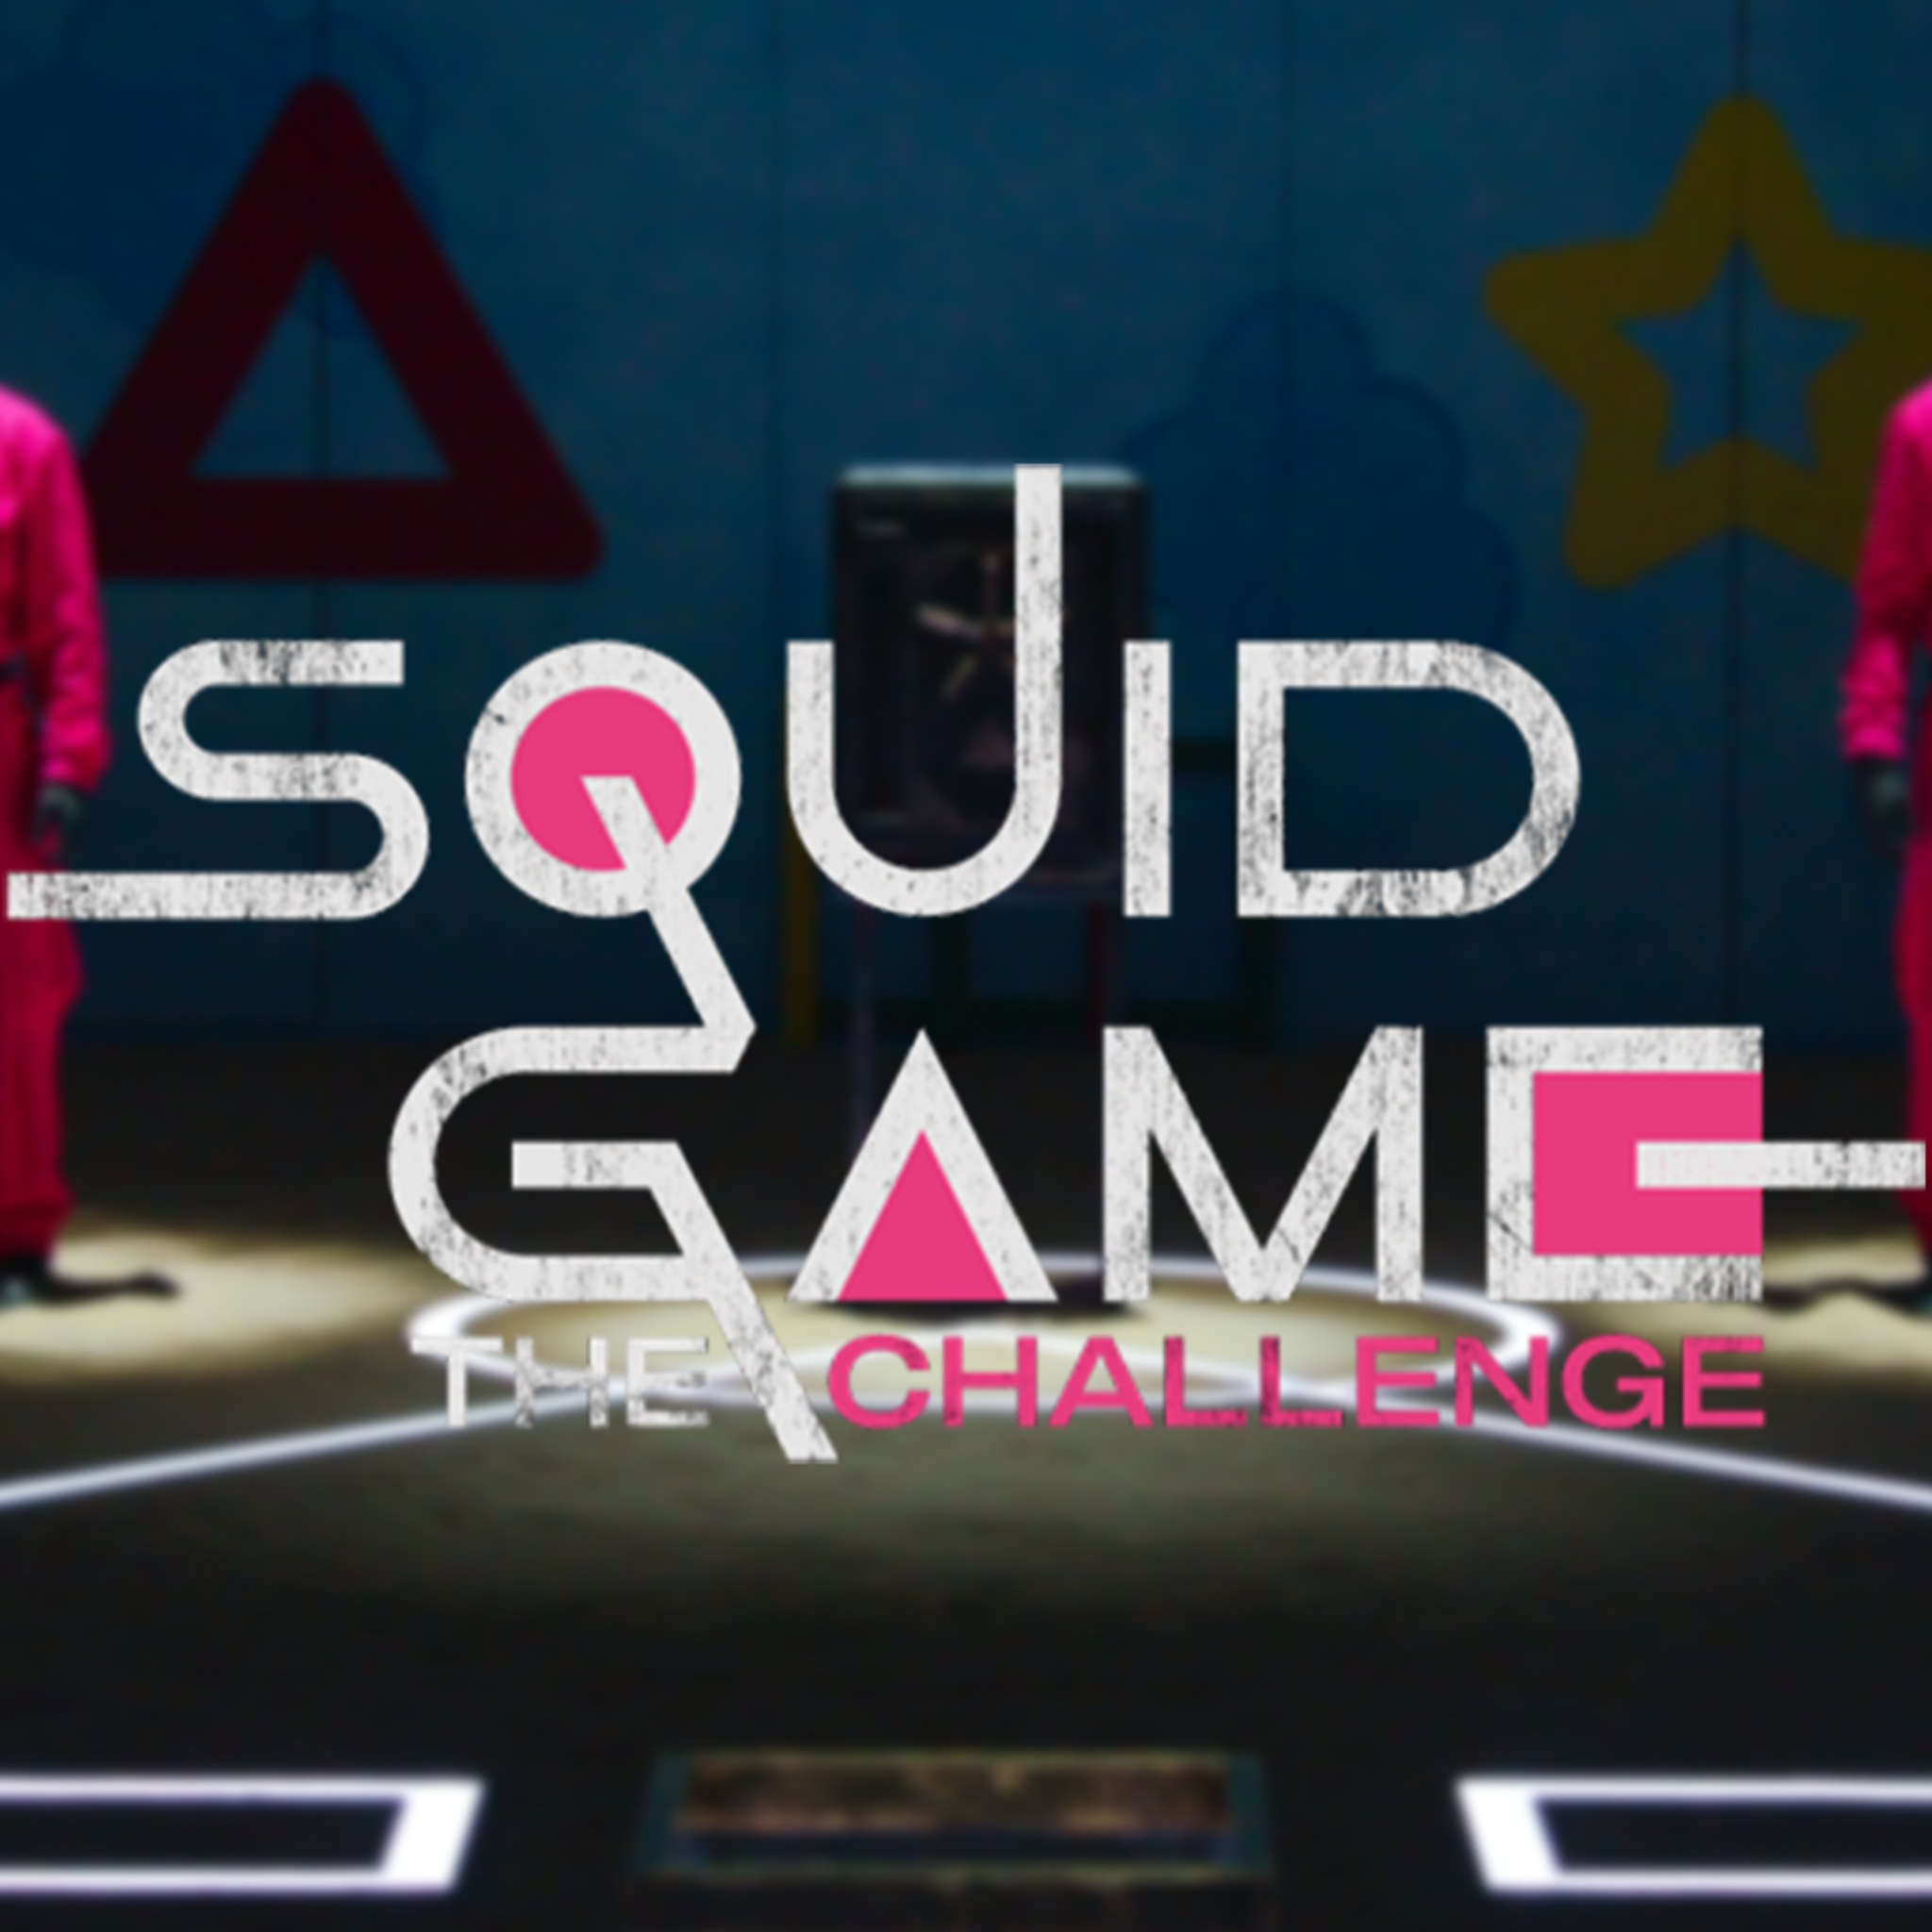 Squid Game: The Challenge: Is It Scripted & Fixed? Is the Winner Already  Decided?